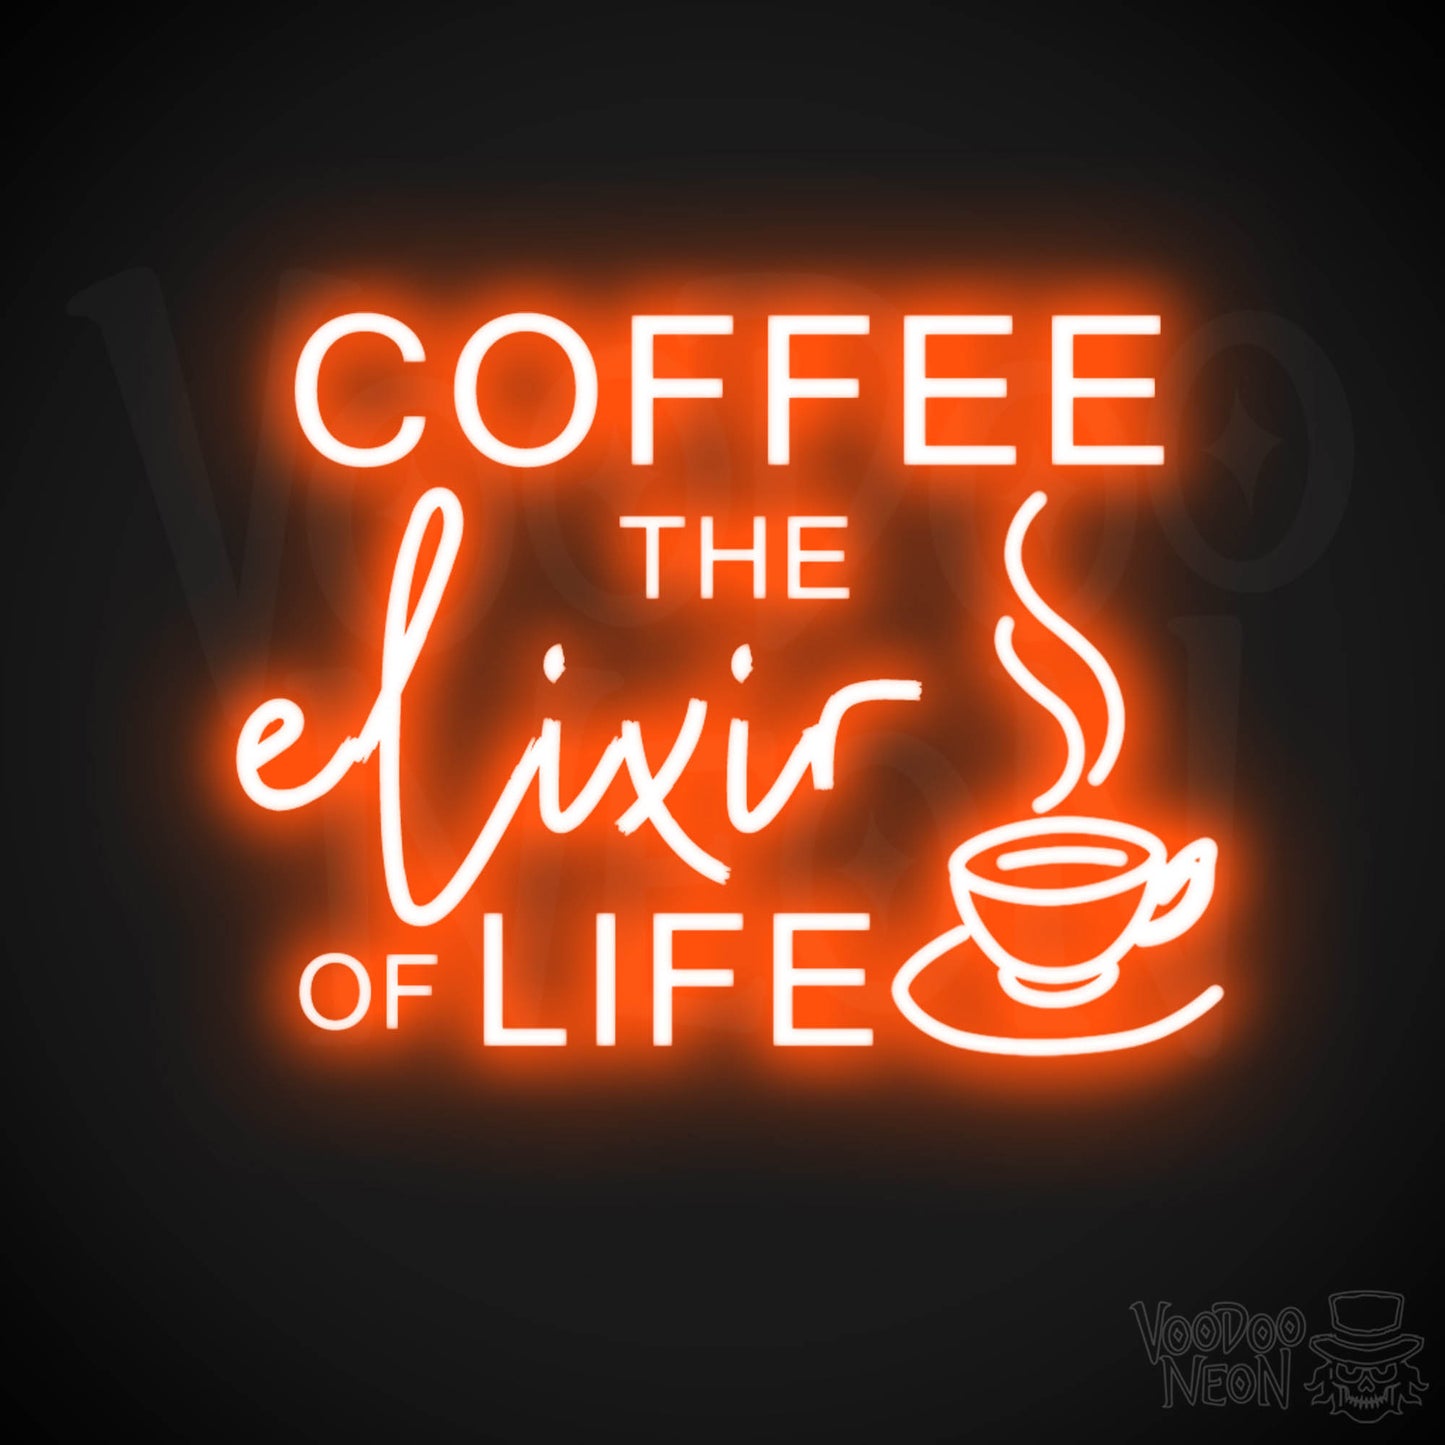 Coffee - The Elixir Of Life Neon Sign - The Elixir Of Life Sign - Color Orange